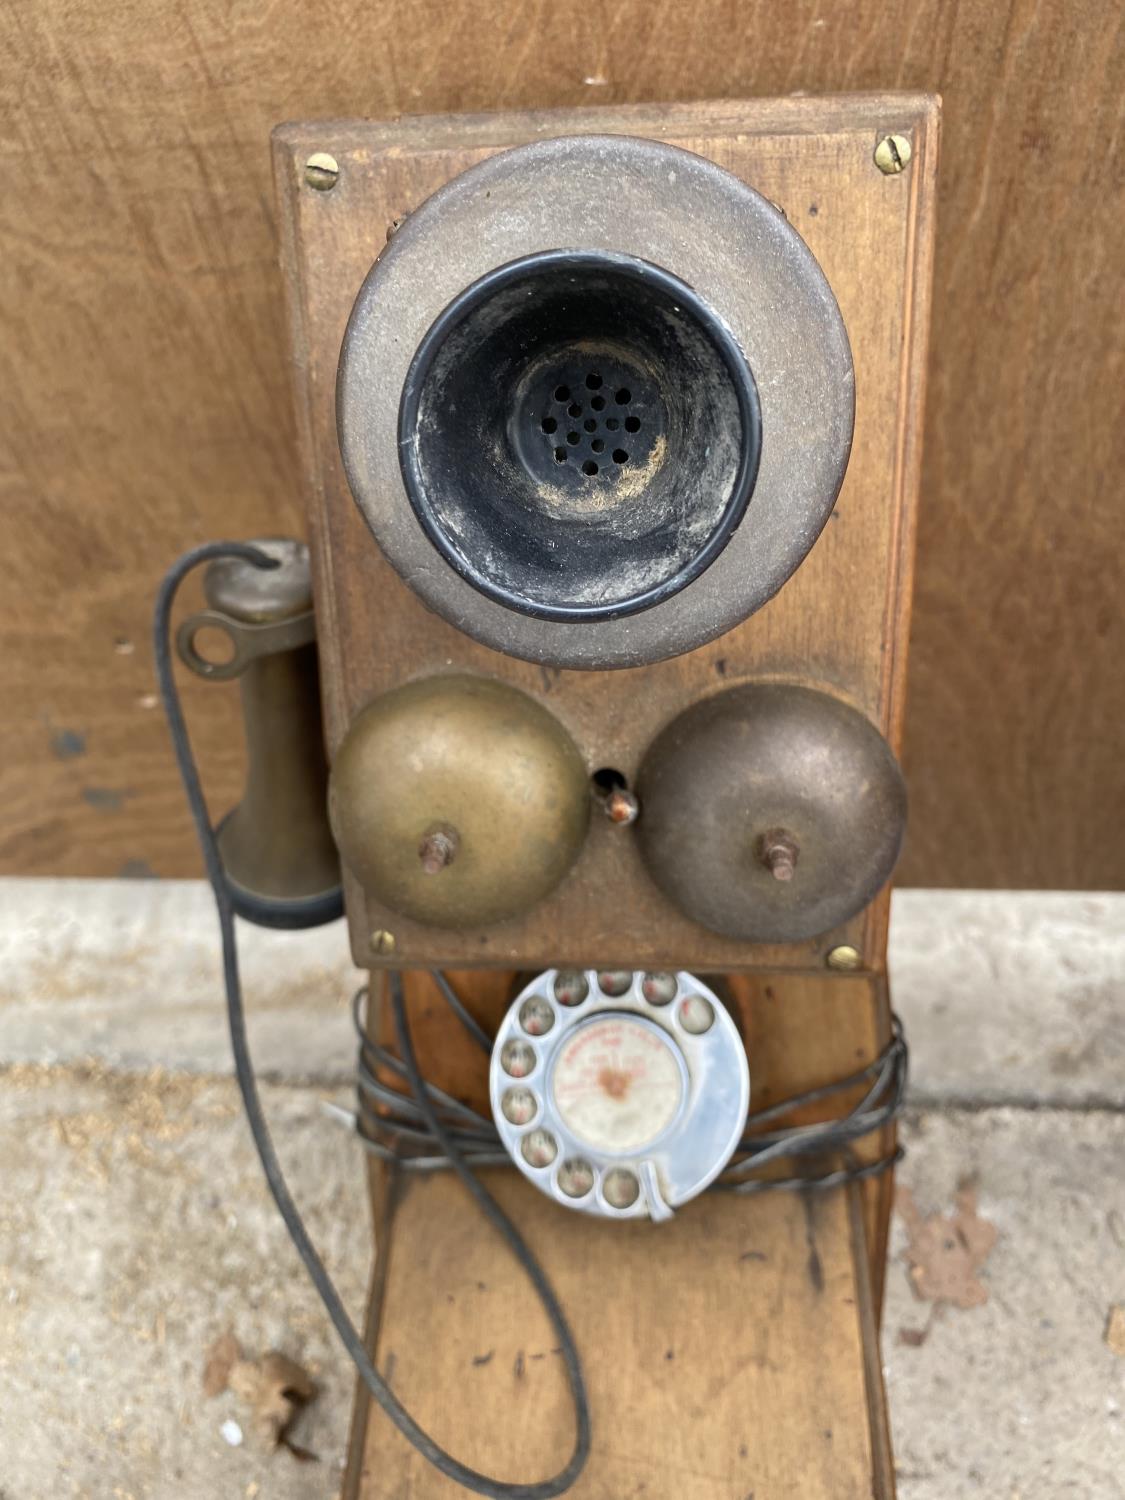 AN EARLY 20TH CENTURY STYLE WALL MOUNTED TELEPHONE - Image 3 of 3